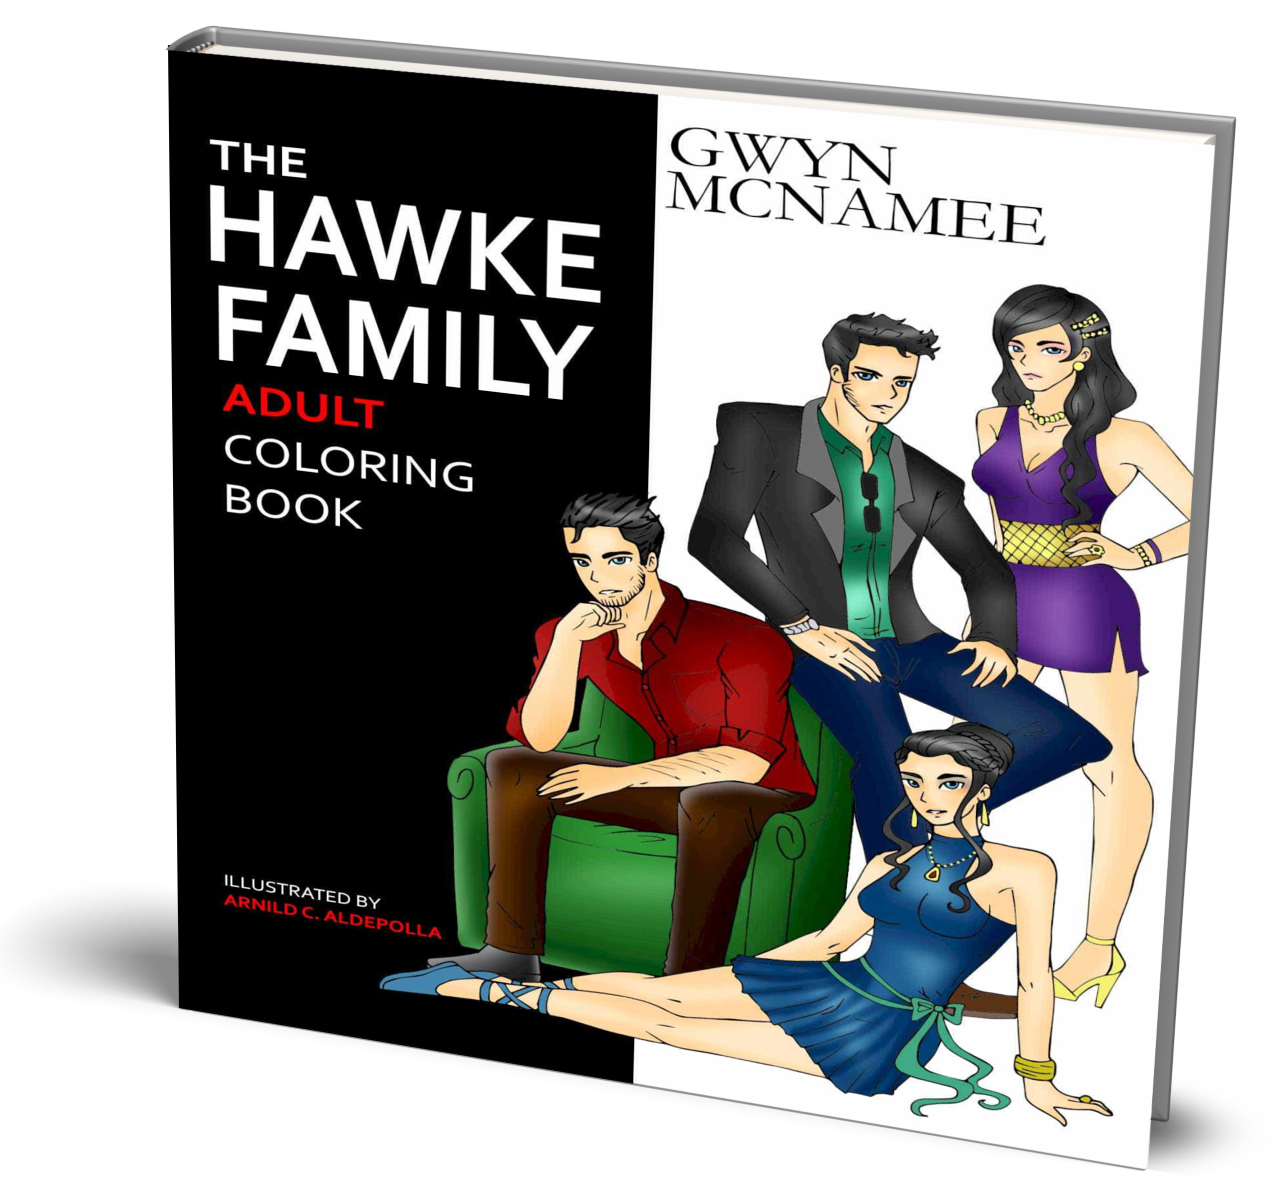 The Hawke Family Coloring Book